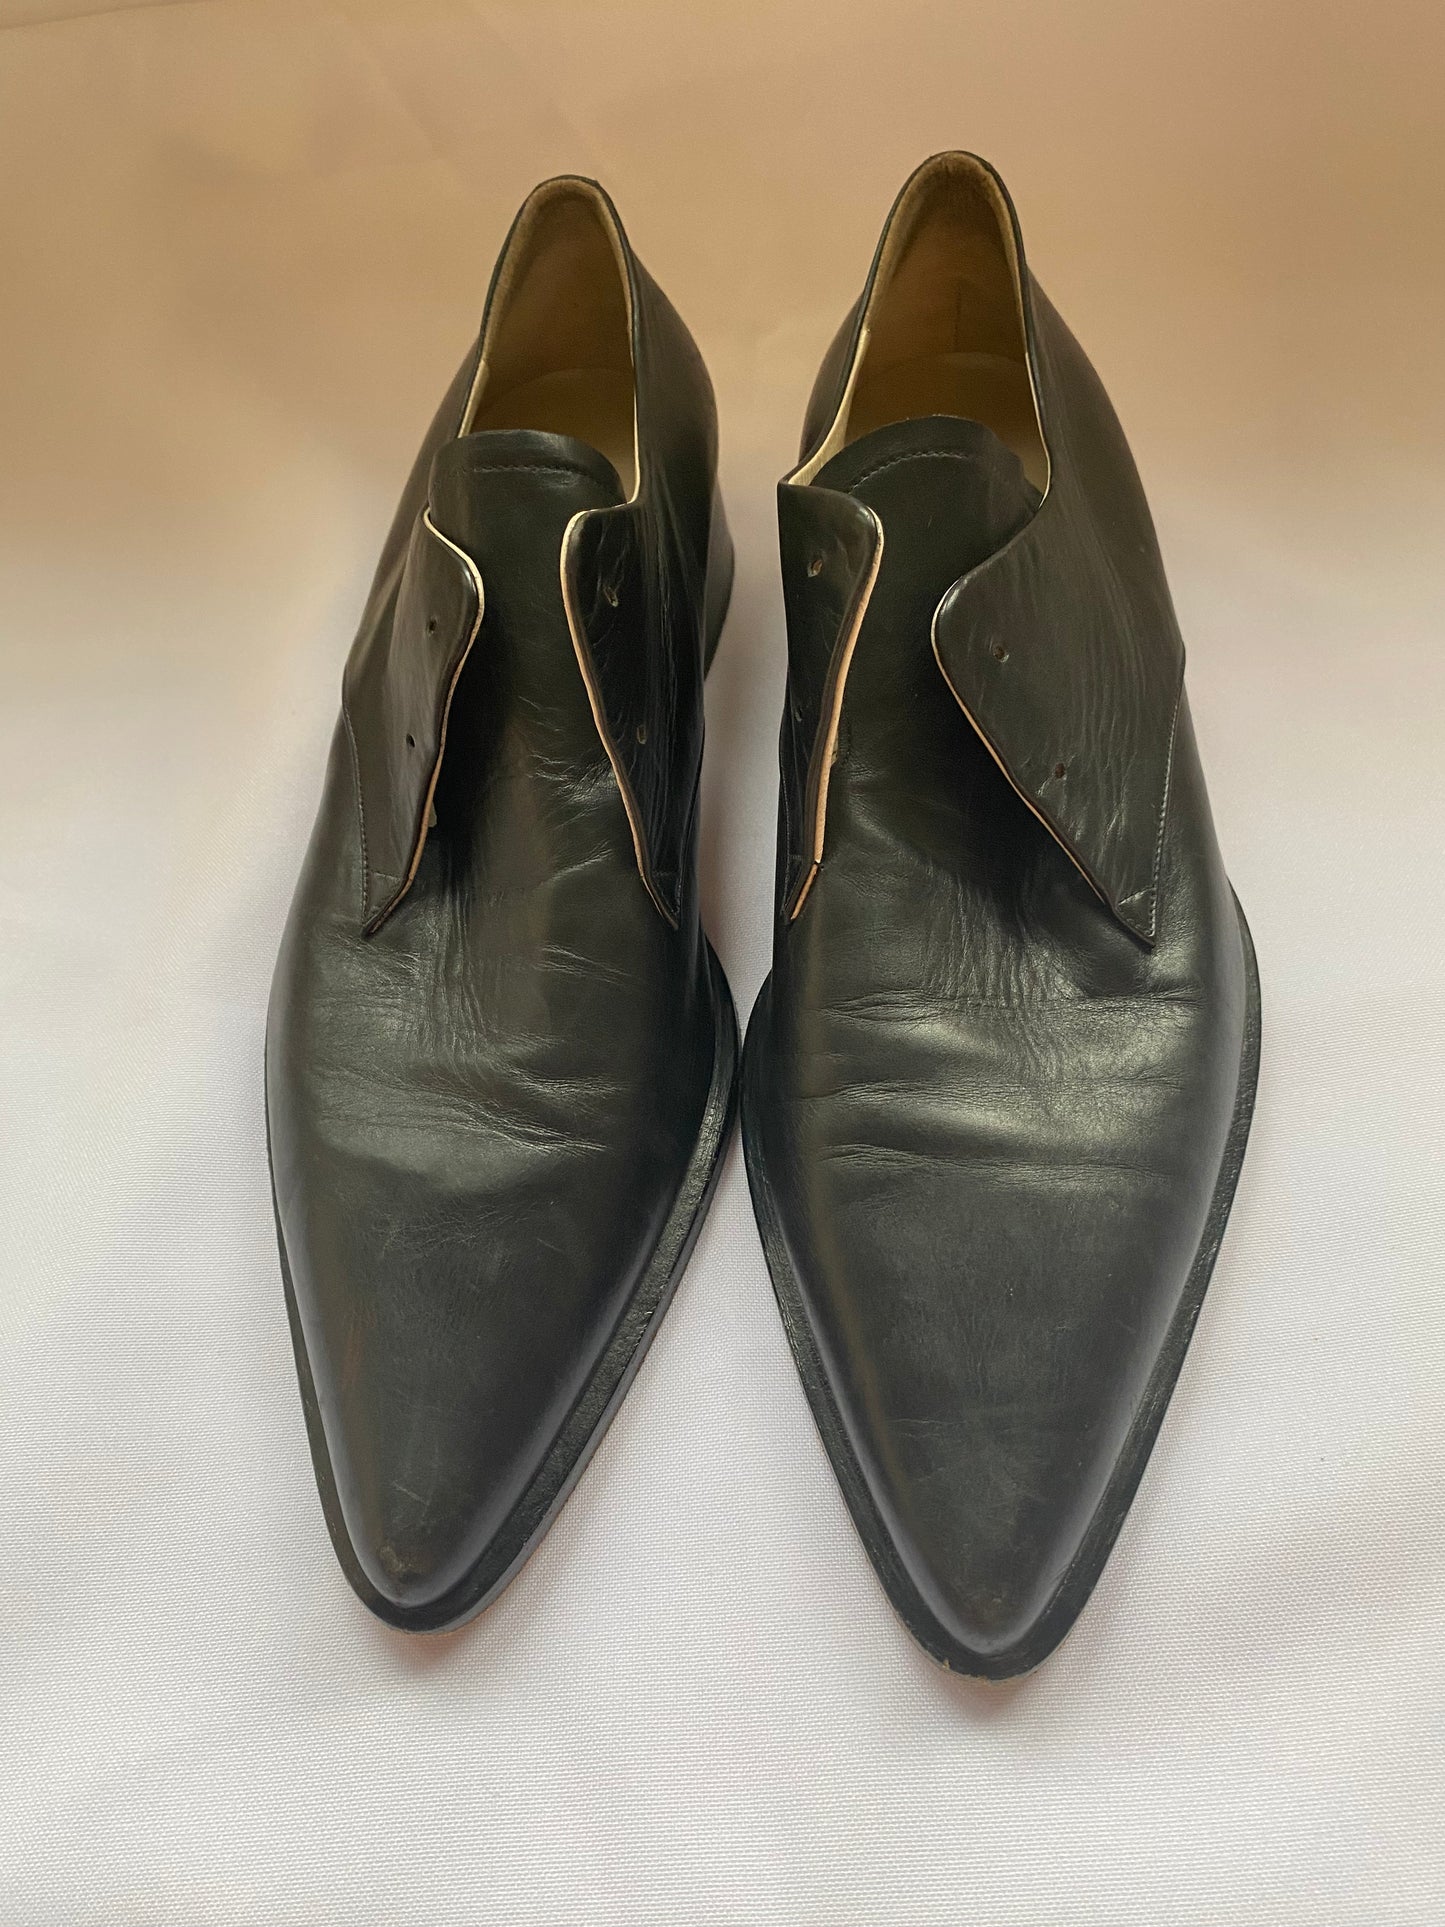 Black Boss Hugo Boss Pointed Leather Dress Shoes